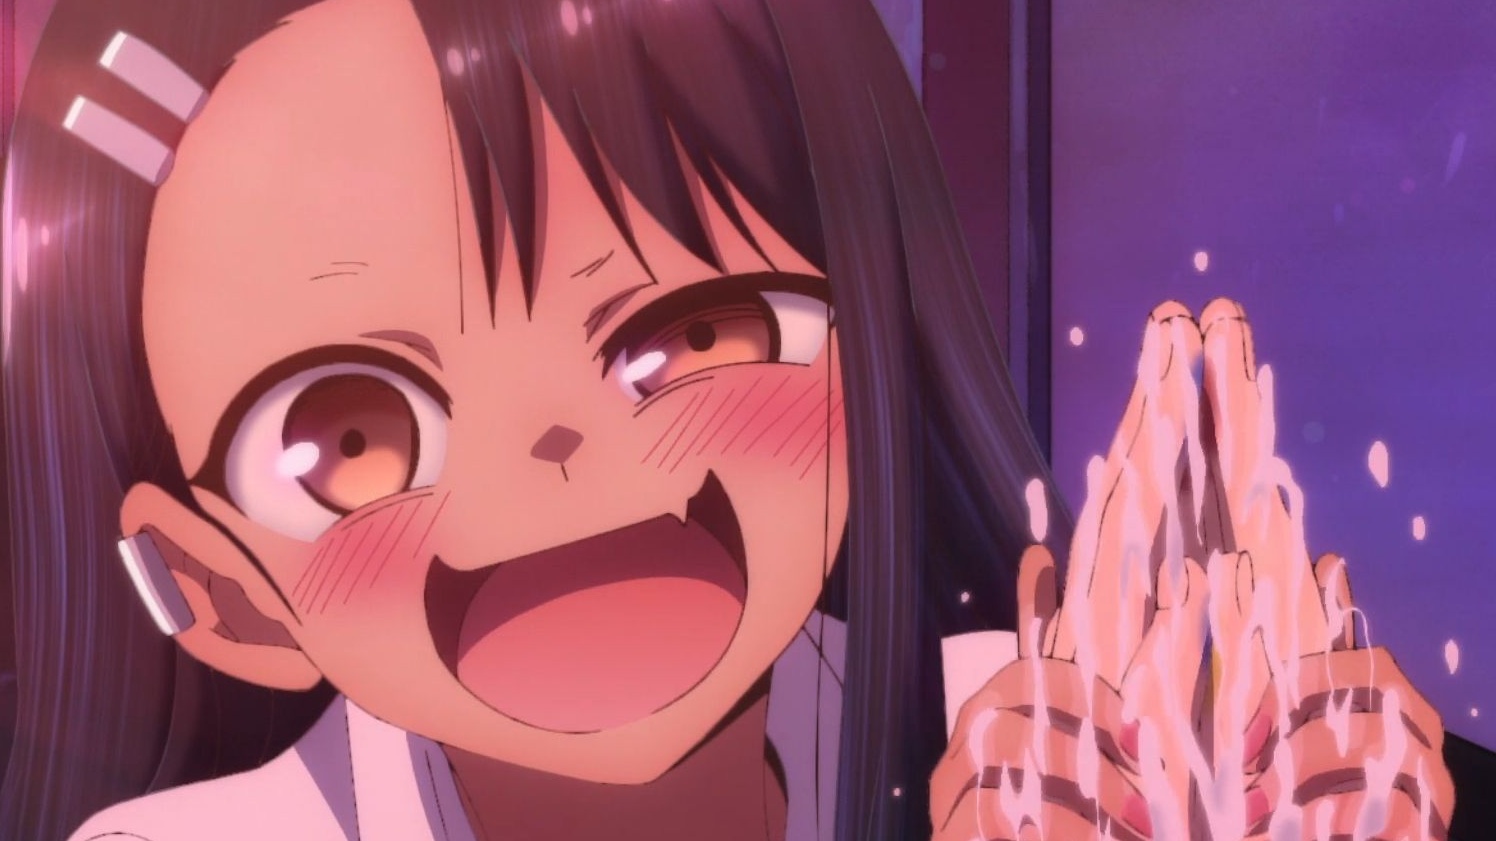 Boxing Anime!  DON'T TOY WITH ME MISS NAGATORO 